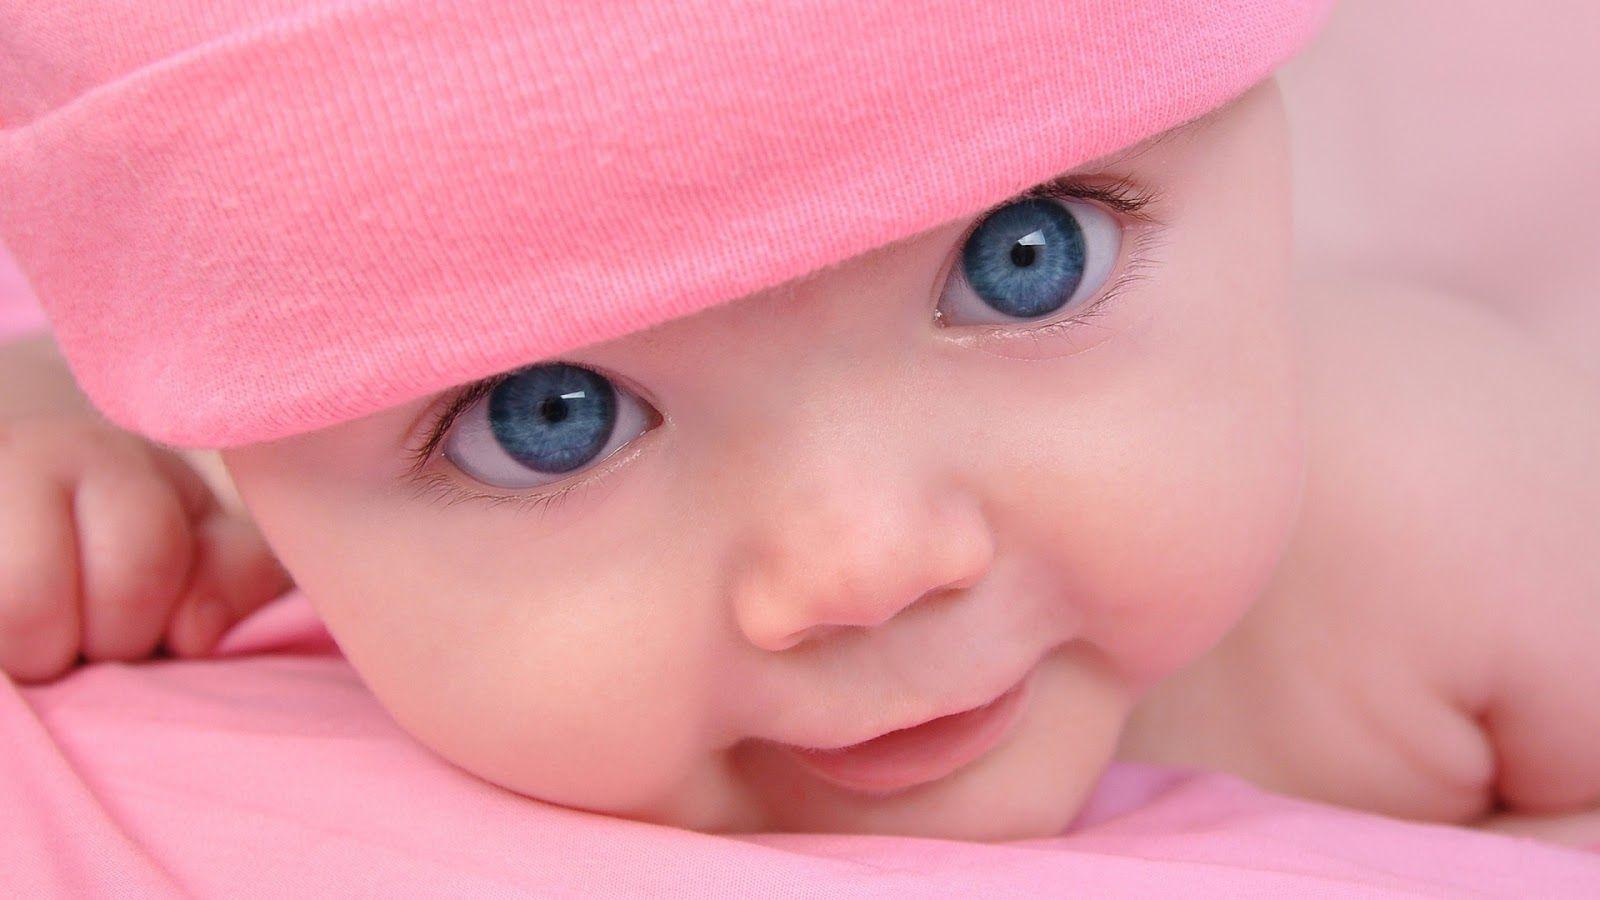 Cute Baby Image and HD Wallpaper